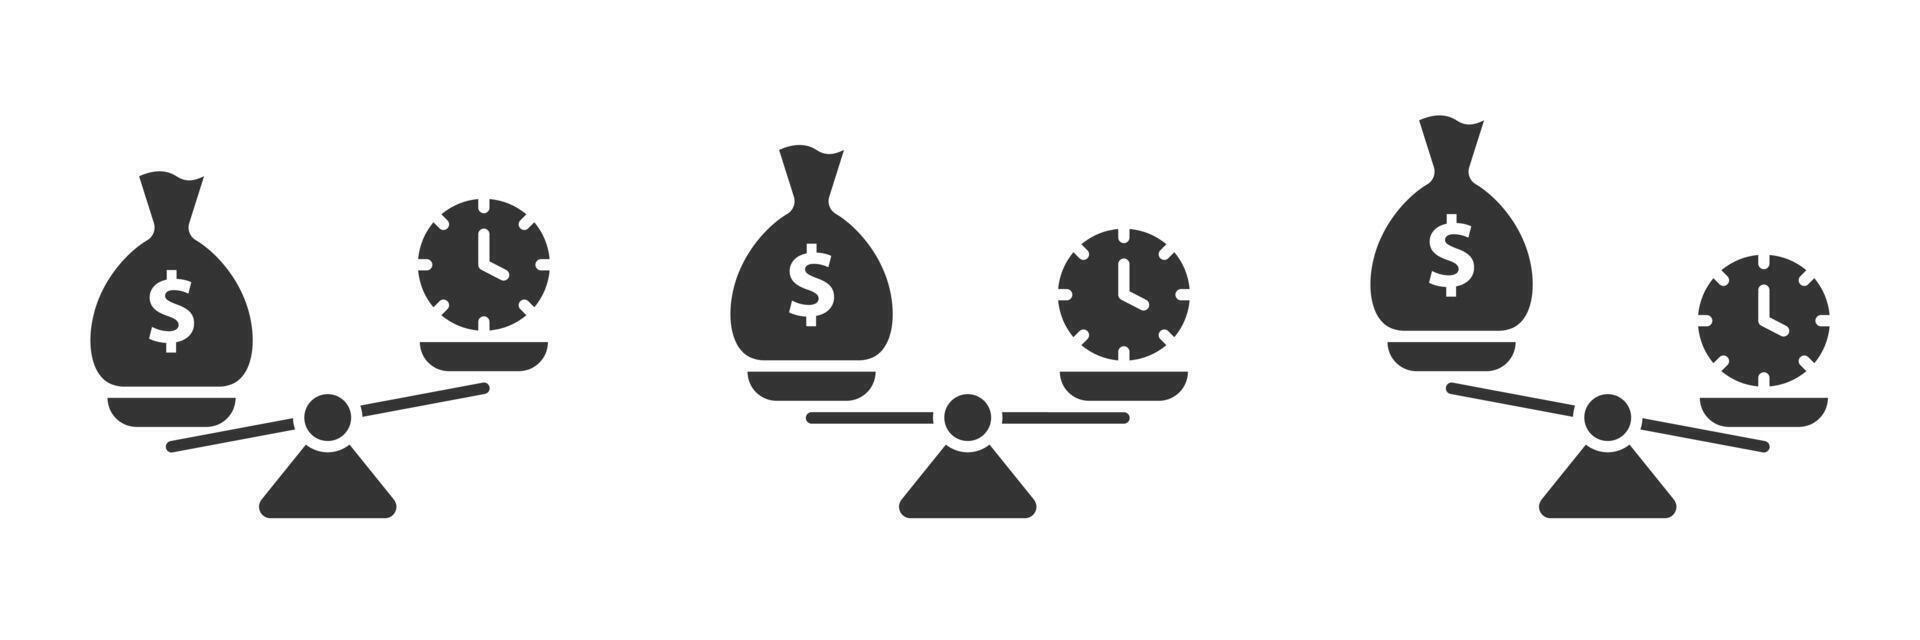 Time and money scales icon. Scales with a bag of money on one bowl and with a clock on another. Flat vector illustration.